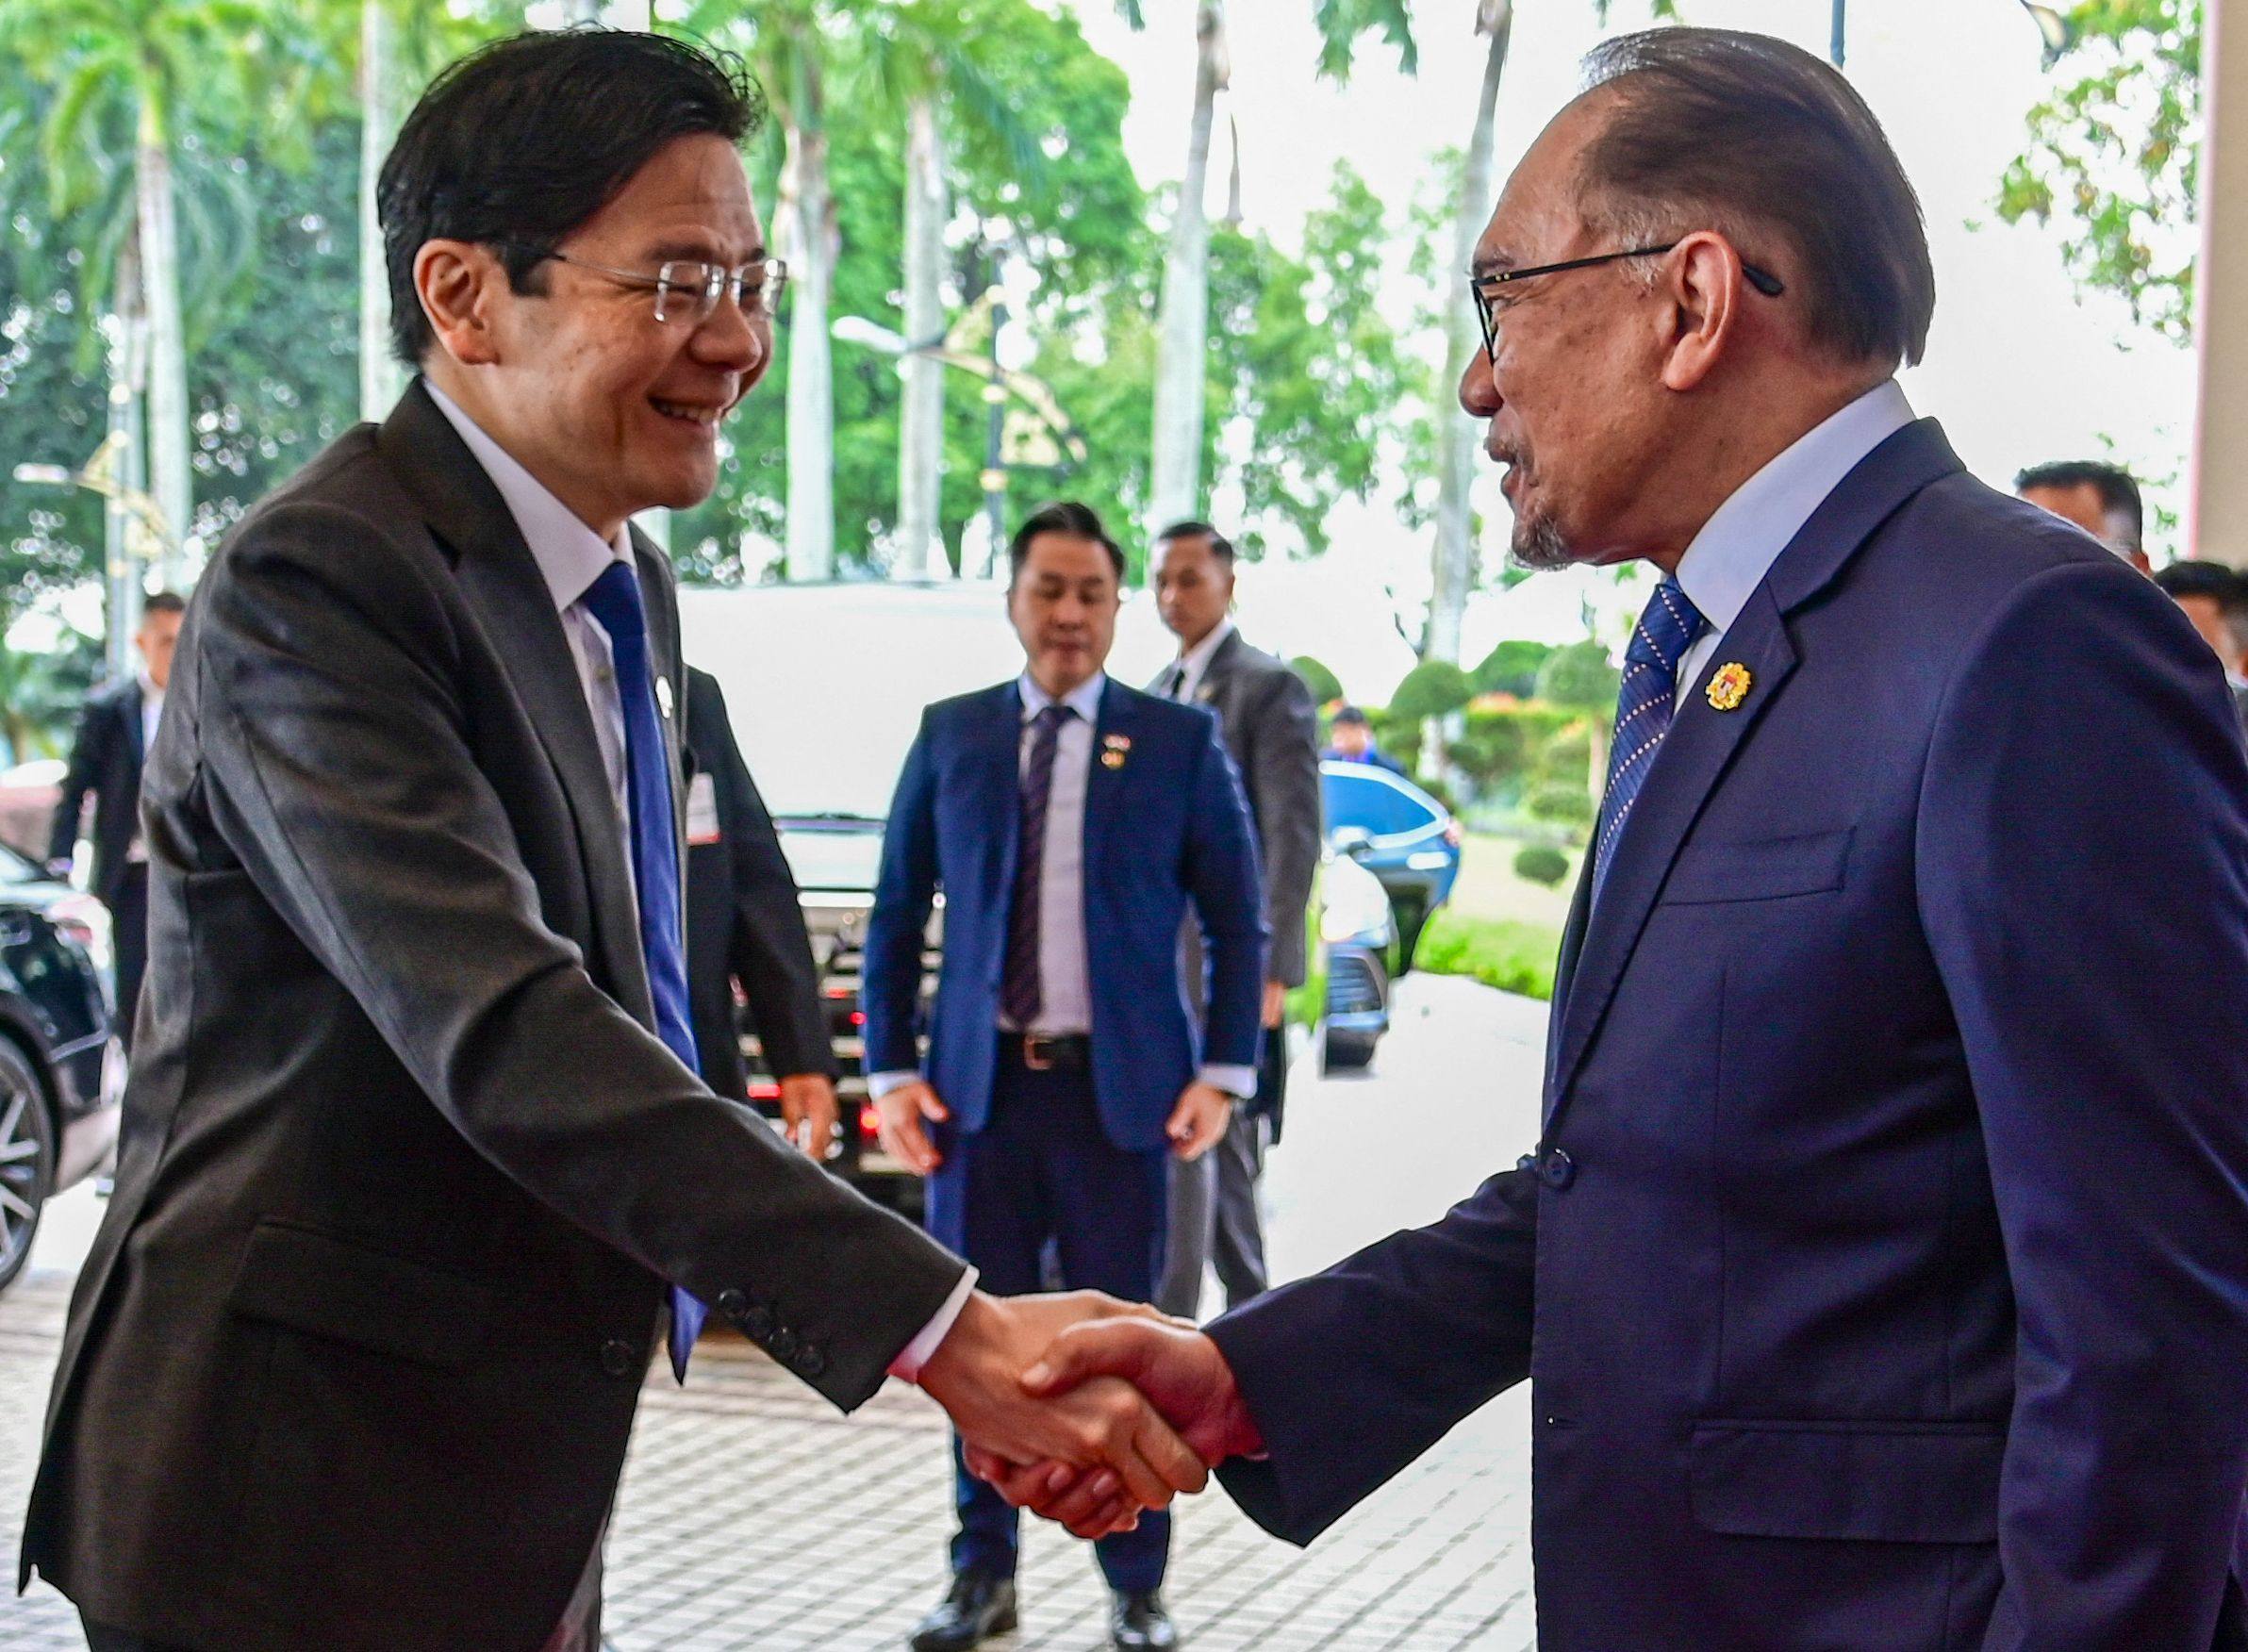 Malaysia’s Prime Minister Anwar Ibrahim and Singapore’s Prime Minister Lawrence Wong shaking hands ahead of their meeting in Putrajaya. Photo: AFP